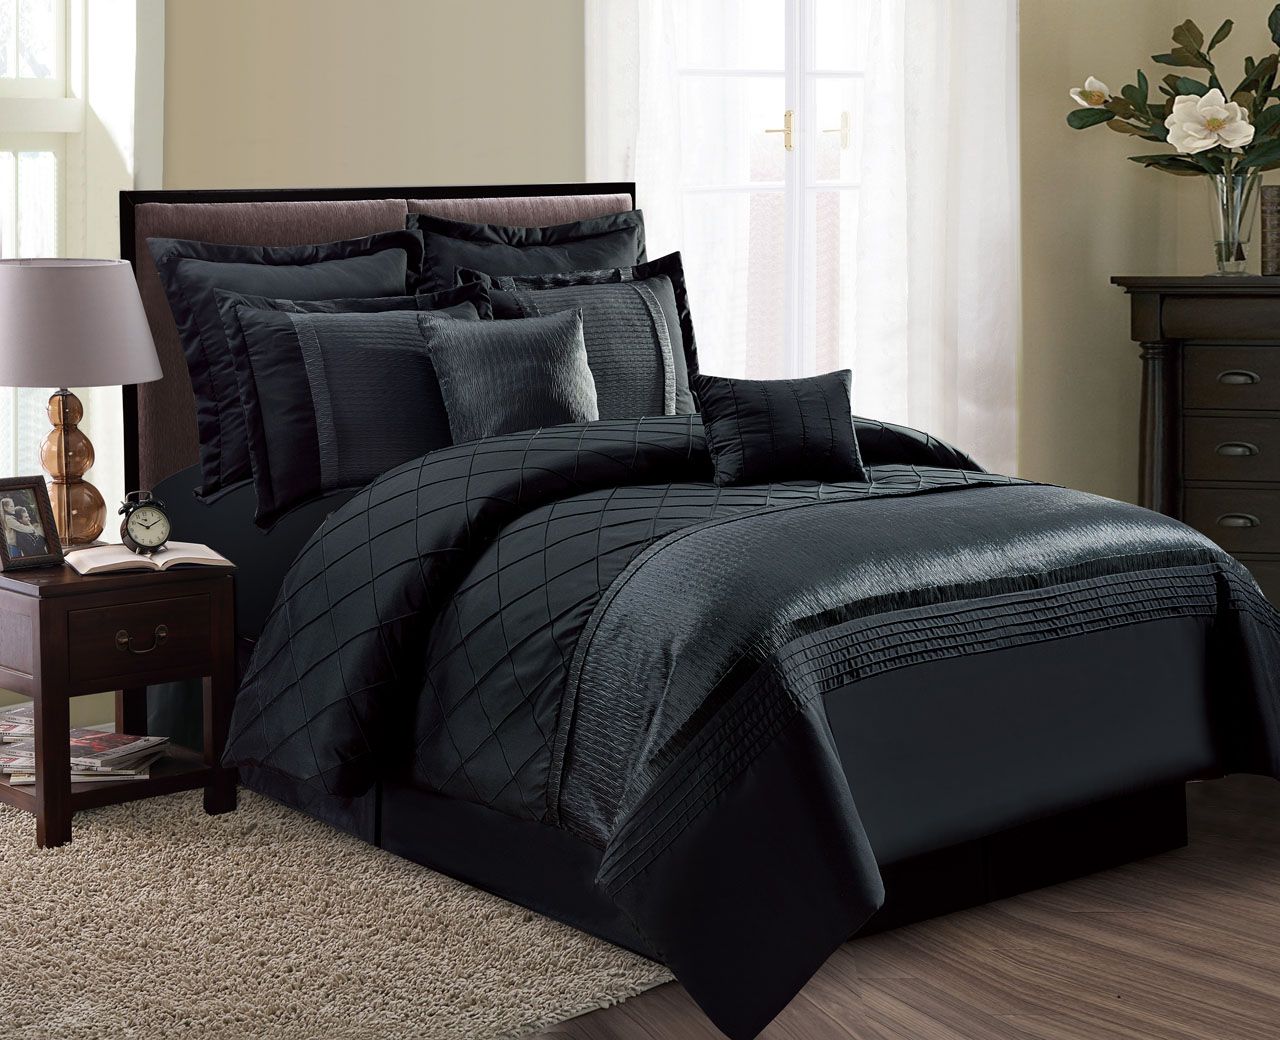 What Is The Ideal Comforter Color For A Black Bed Frame